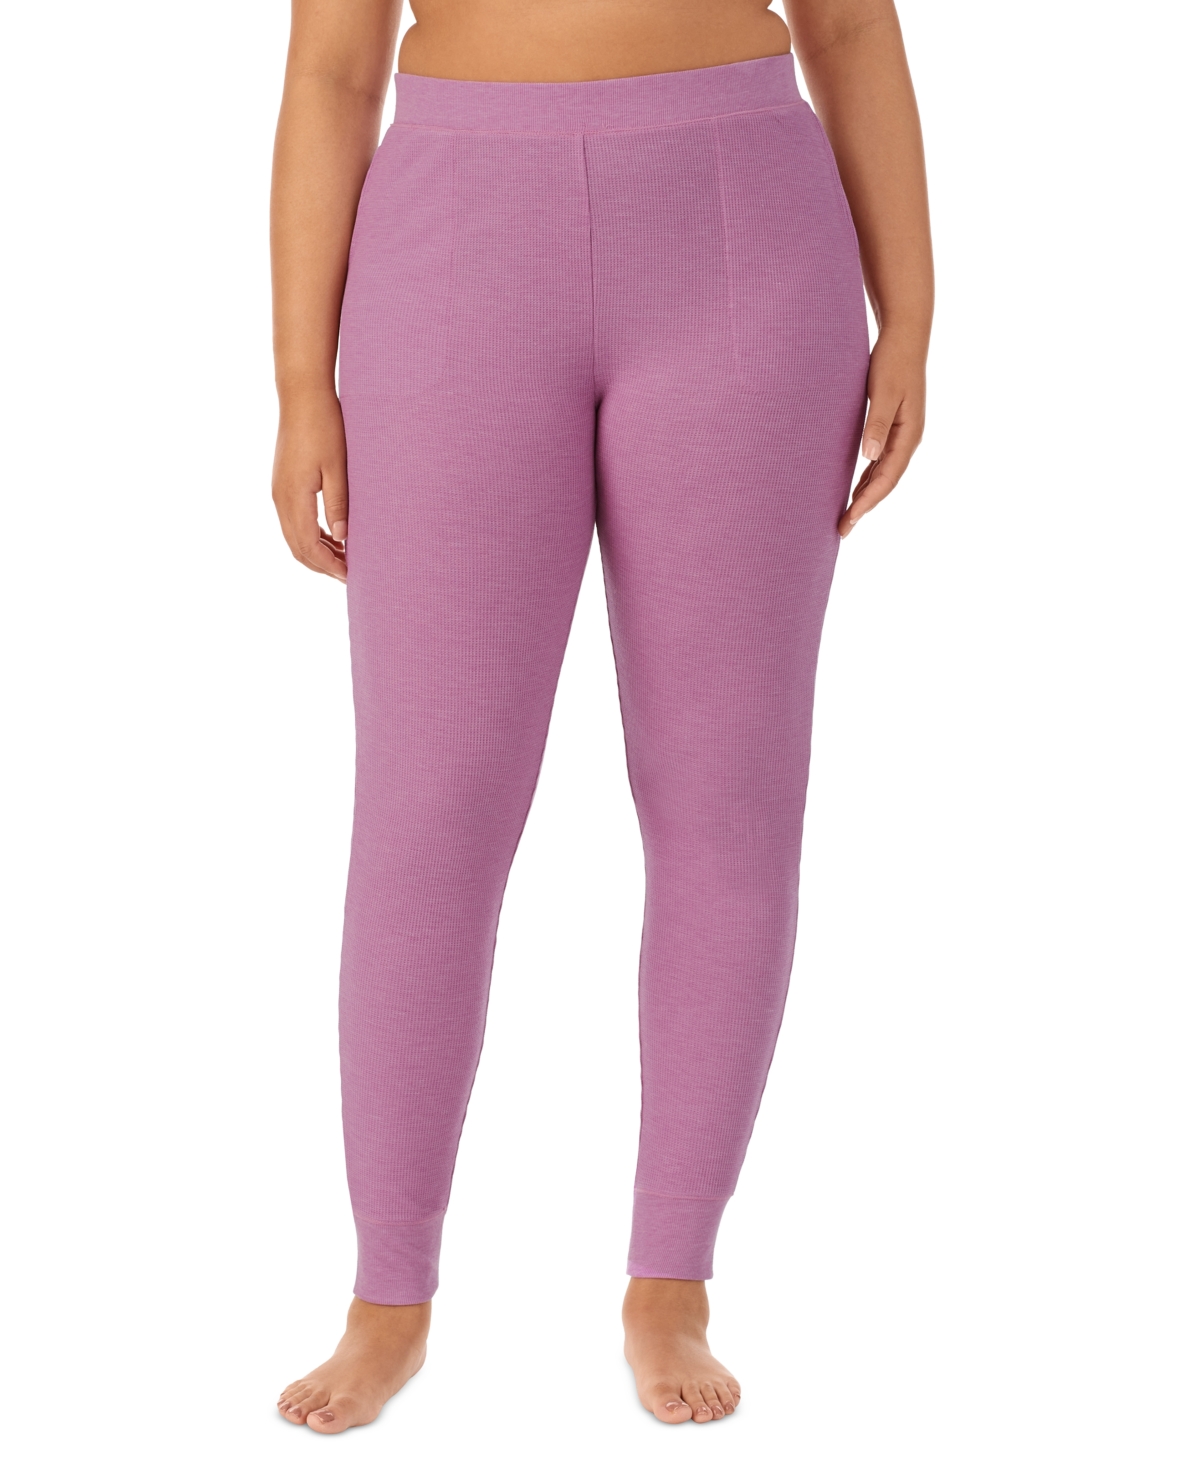 Cuddl Duds Plus Size Stretch Thermal Mid-Rise Leggings - Stone